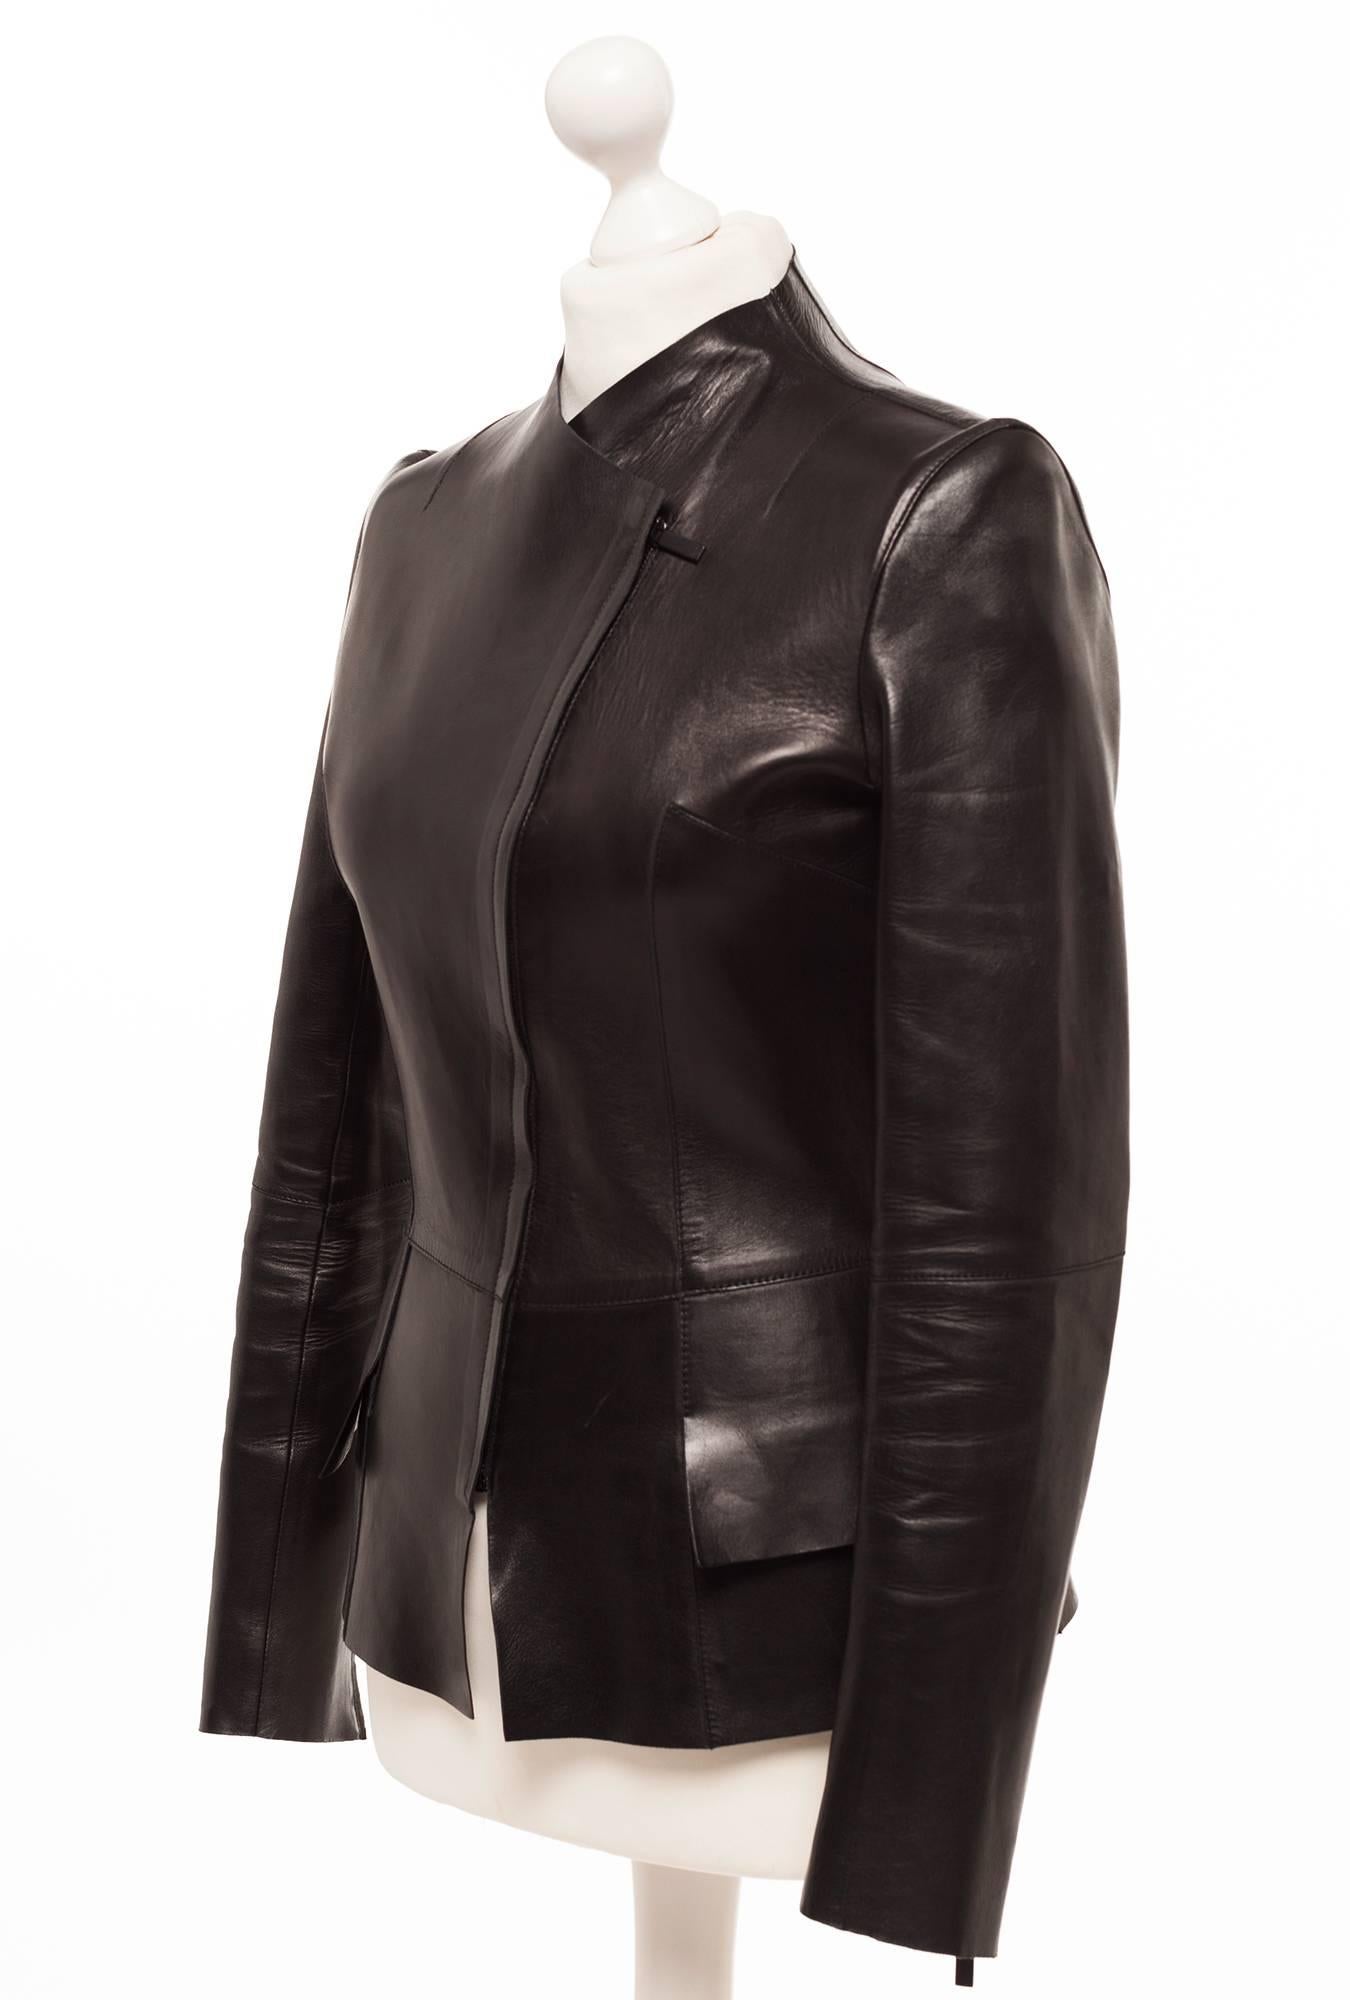 Gucci by Tom Ford Leather asymmetrical Blazer. Blazer or Jacket is exquisite in the cut and shape and all the details it offers to enhance the wearer into another feeling of sexiness. asymmetric front zipper, Slight shoulder puff detail, extensive